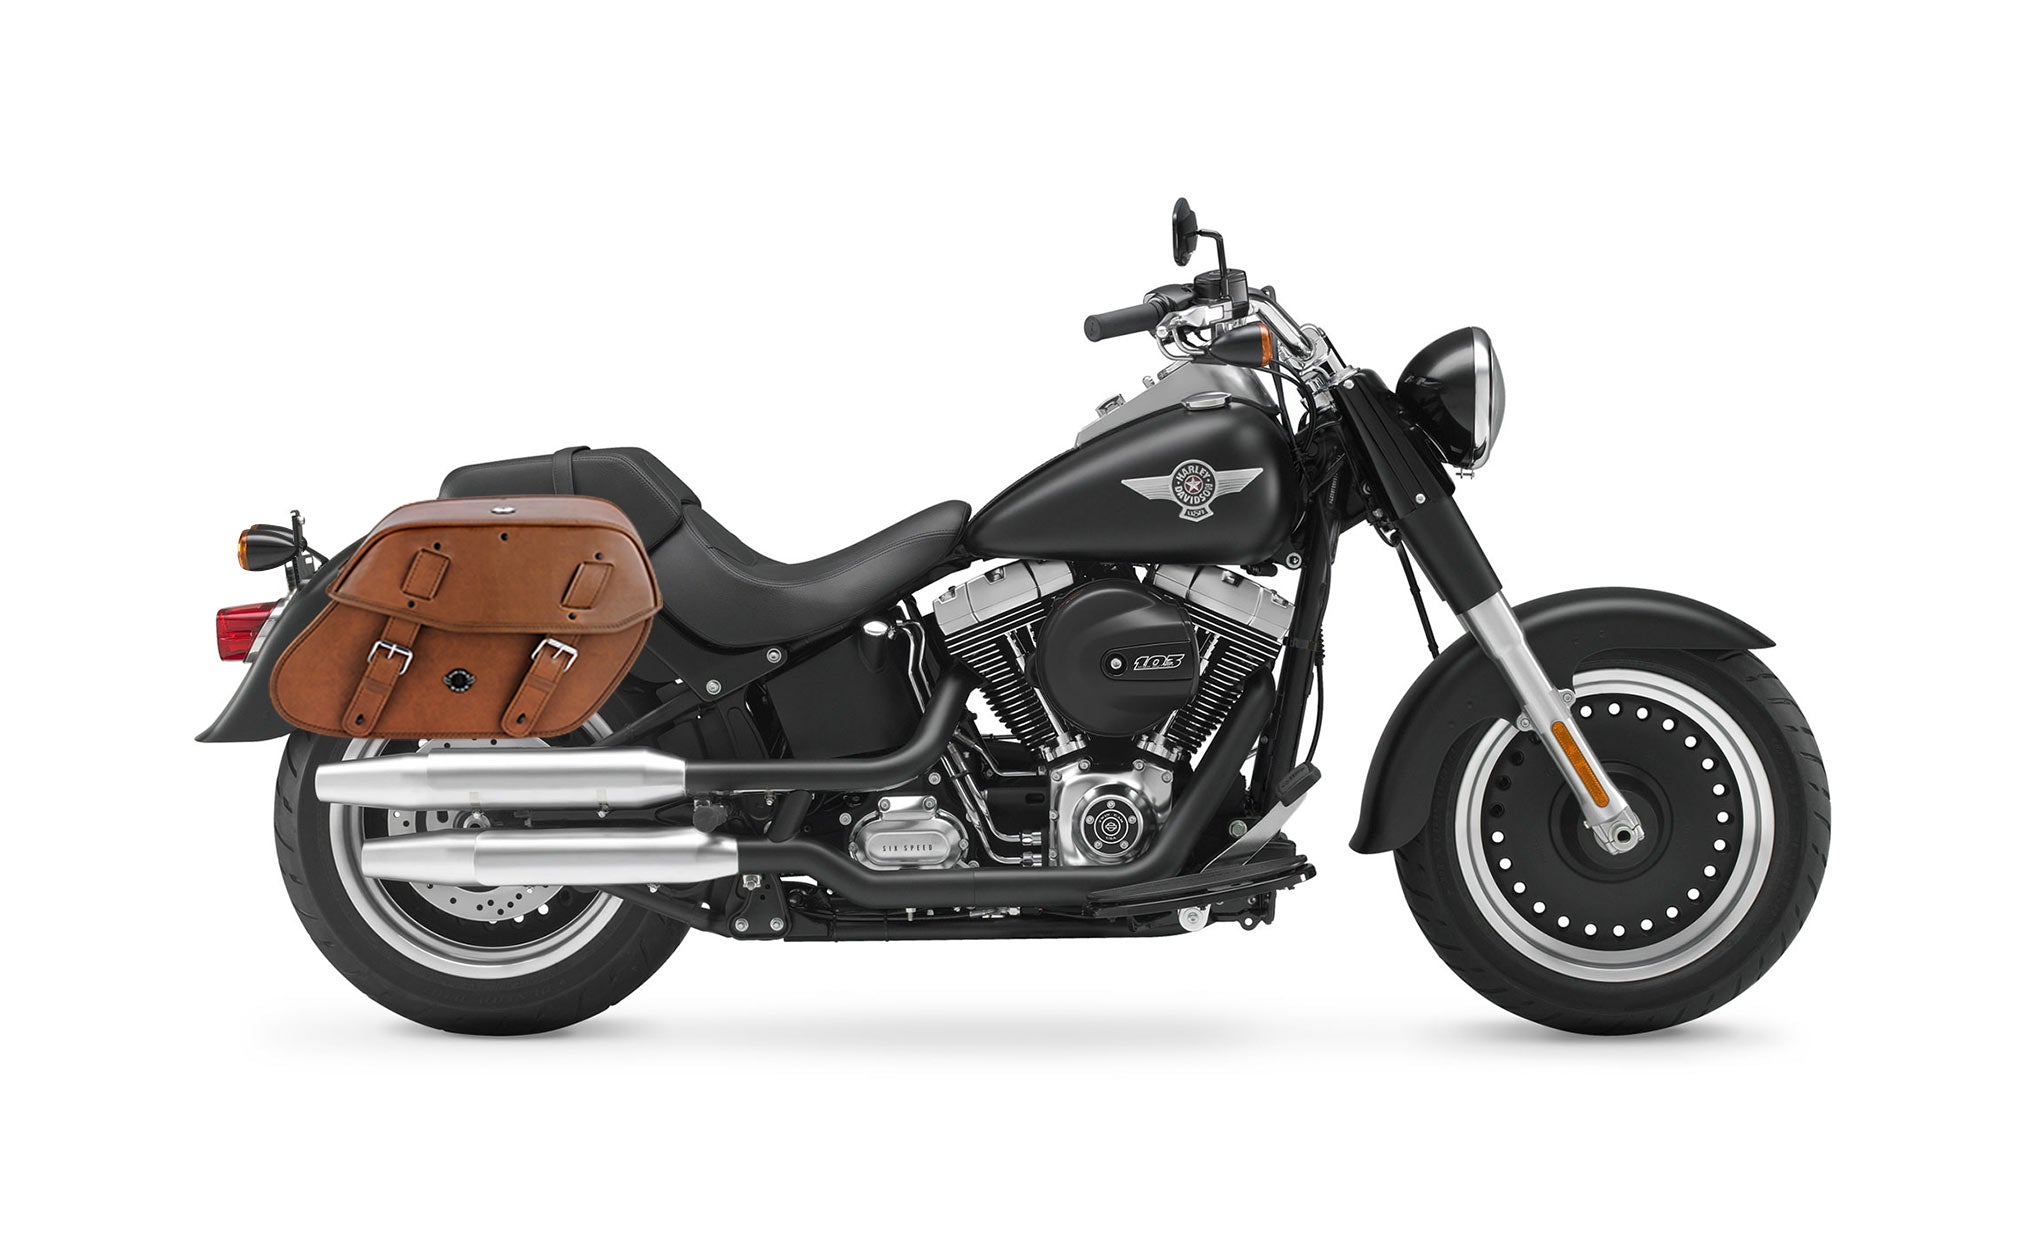 Viking Odin Brown Large Leather Motorcycle Saddlebags For Harley Softail Fat Boy Lo Flstfb on Bike Photo @expand